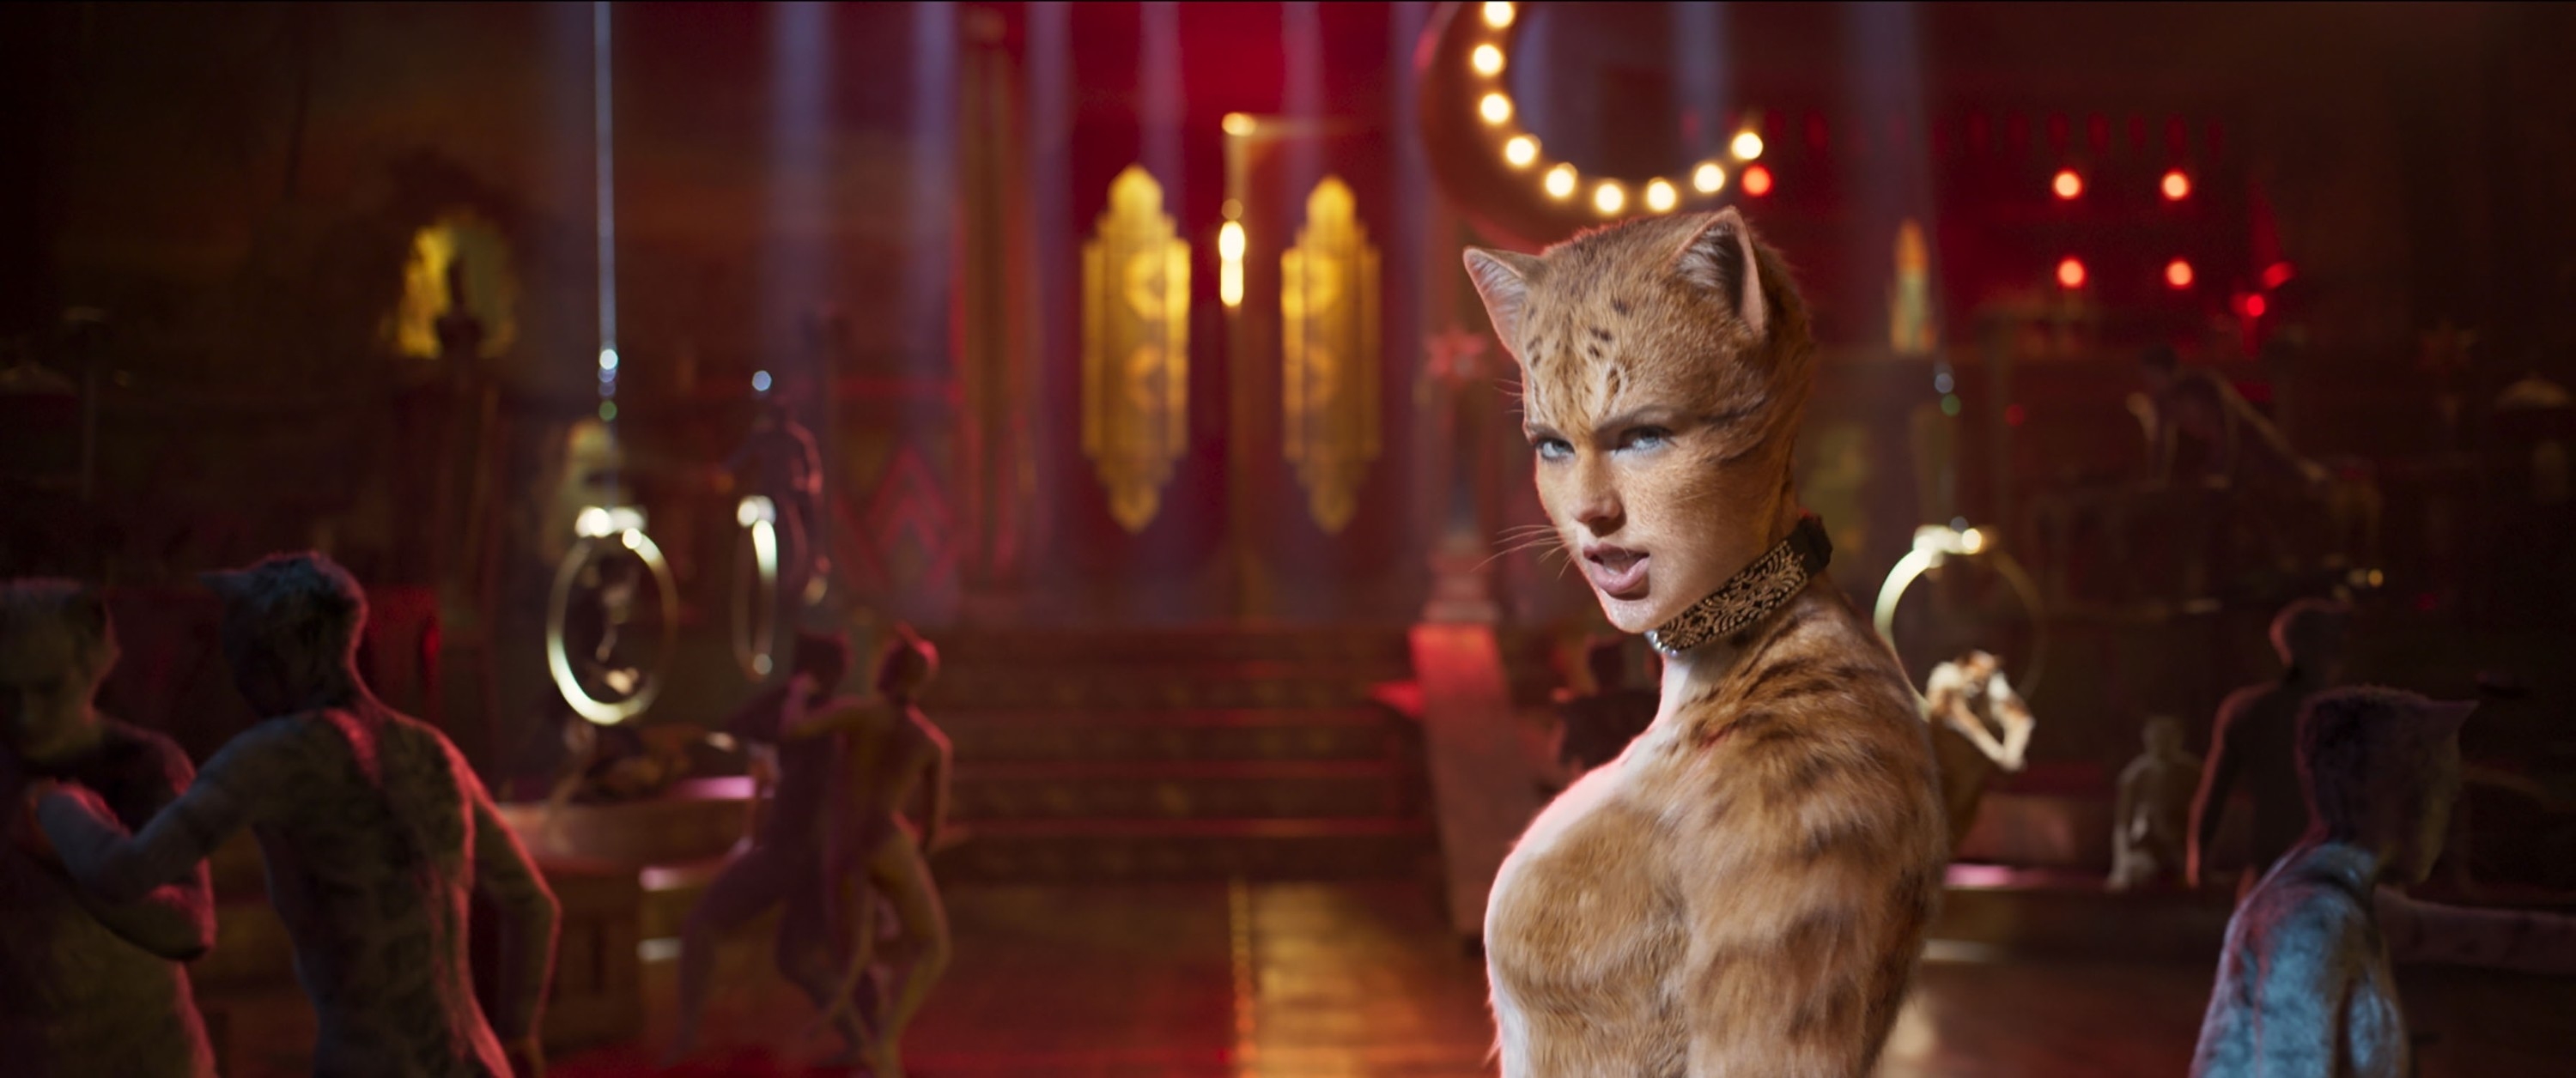 Taylor Swift as Bombalurina in a scene from the film &quot;Cats,&quot; wearing feline makeup and costume, set in a theatrical, dimly lit venue